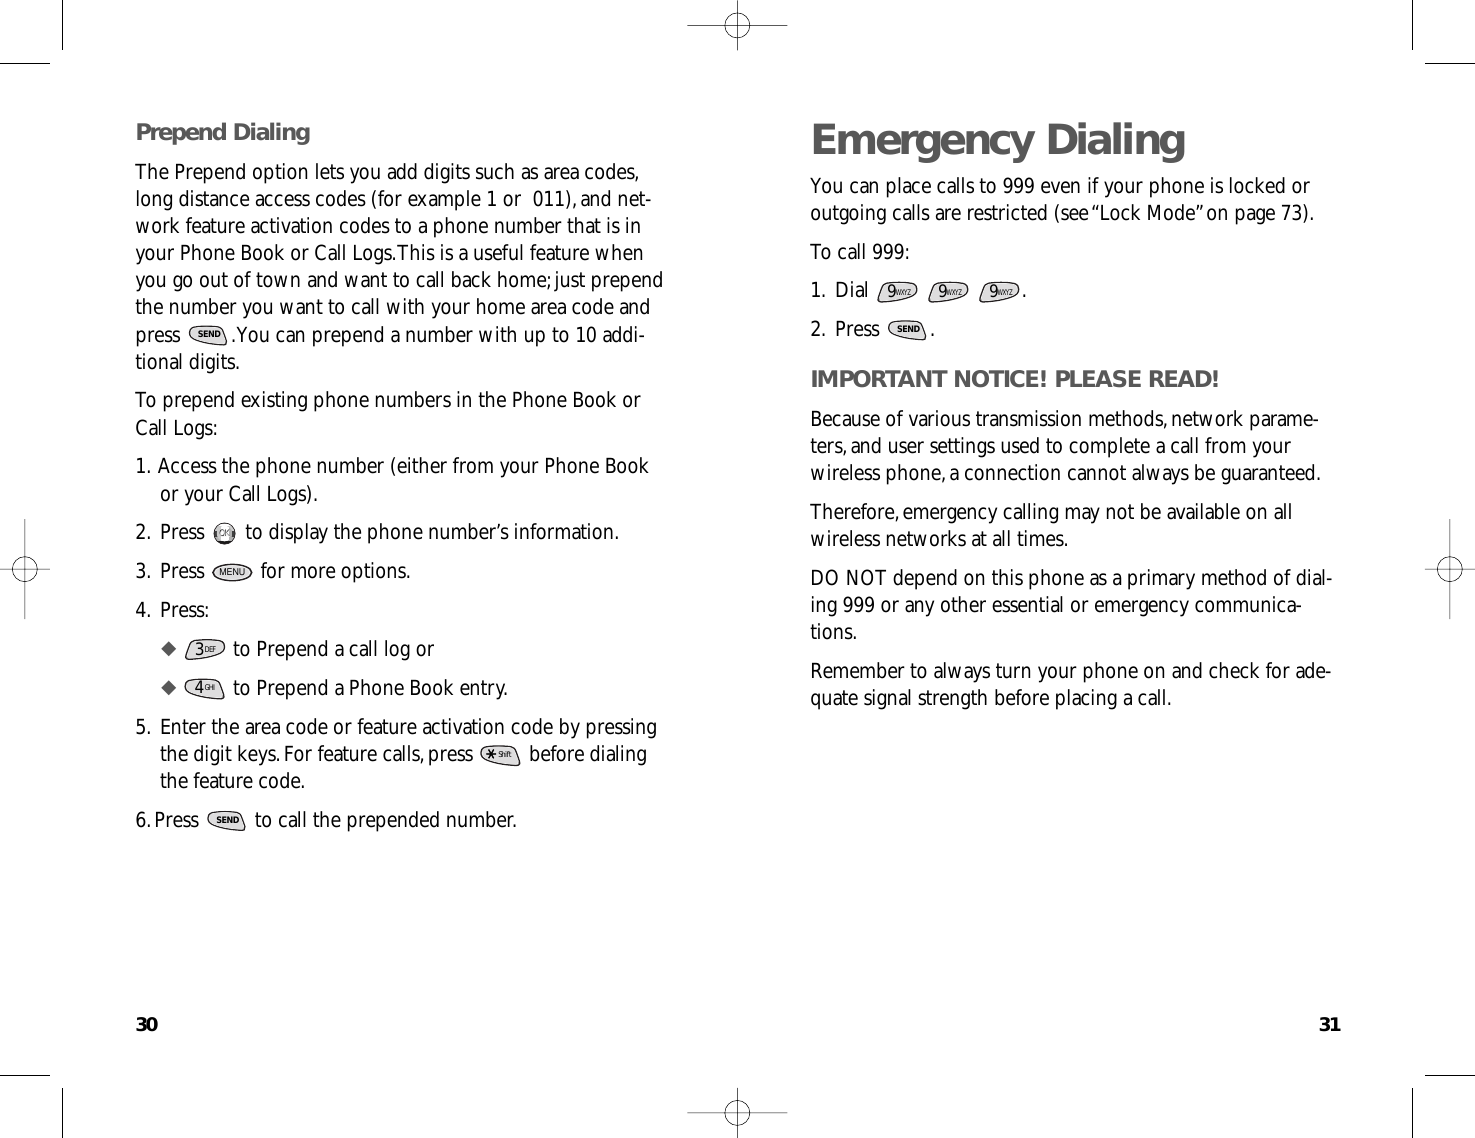 3130Emergency DialingYou can place calls to 999 even if your phone is locked oroutgoing calls are restricted (see “Lock Mode”on page 73).To call 999:1.Dial .2.Press .IMPORTANT NOTICE! PLEASE READ!Because of various transmission methods,network parame-ters,and user settings used to complete a call from yourwireless phone,a connection cannot always be guaranteed.Therefore,emergency calling may not be available on allwireless networks at all times.DO NOT depend on this phone as a primary method of dial-ing 999 or any other essential or emergency communica-tions.Remember to always turn your phone on and check for ade-quate signal strength before placing a call.SEND9WXYZ9WXYZ9WXYZPrepend DialingThe Prepend option lets you add digits such as area codes,long distance access codes (for example 1 or  011),and net-work feature activation codes to a phone number that is inyour Phone Book or Call Logs.This is a useful feature whenyou go out of town and want to call back home;just prependthe number you want to call with your home area code andpress  .You can prepend a number with up to 10 addi-tional digits.To prepend existing phone numbers in the Phone Book orCall Logs:1.Access the phone number (either from your Phone Bookor your Call Logs).2.Press  to display the phone number’s information.3.Press  for more options.4.Press:◆ to Prepend a call log or◆ to Prepend a Phone Book entry.5.Enter the area code or feature activation code by pressingthe digit keys.For feature calls,press  before dialingthe feature code.6.Press  to call the prepended number.SENDShiftGHI43DEFMENUOKOKSEND